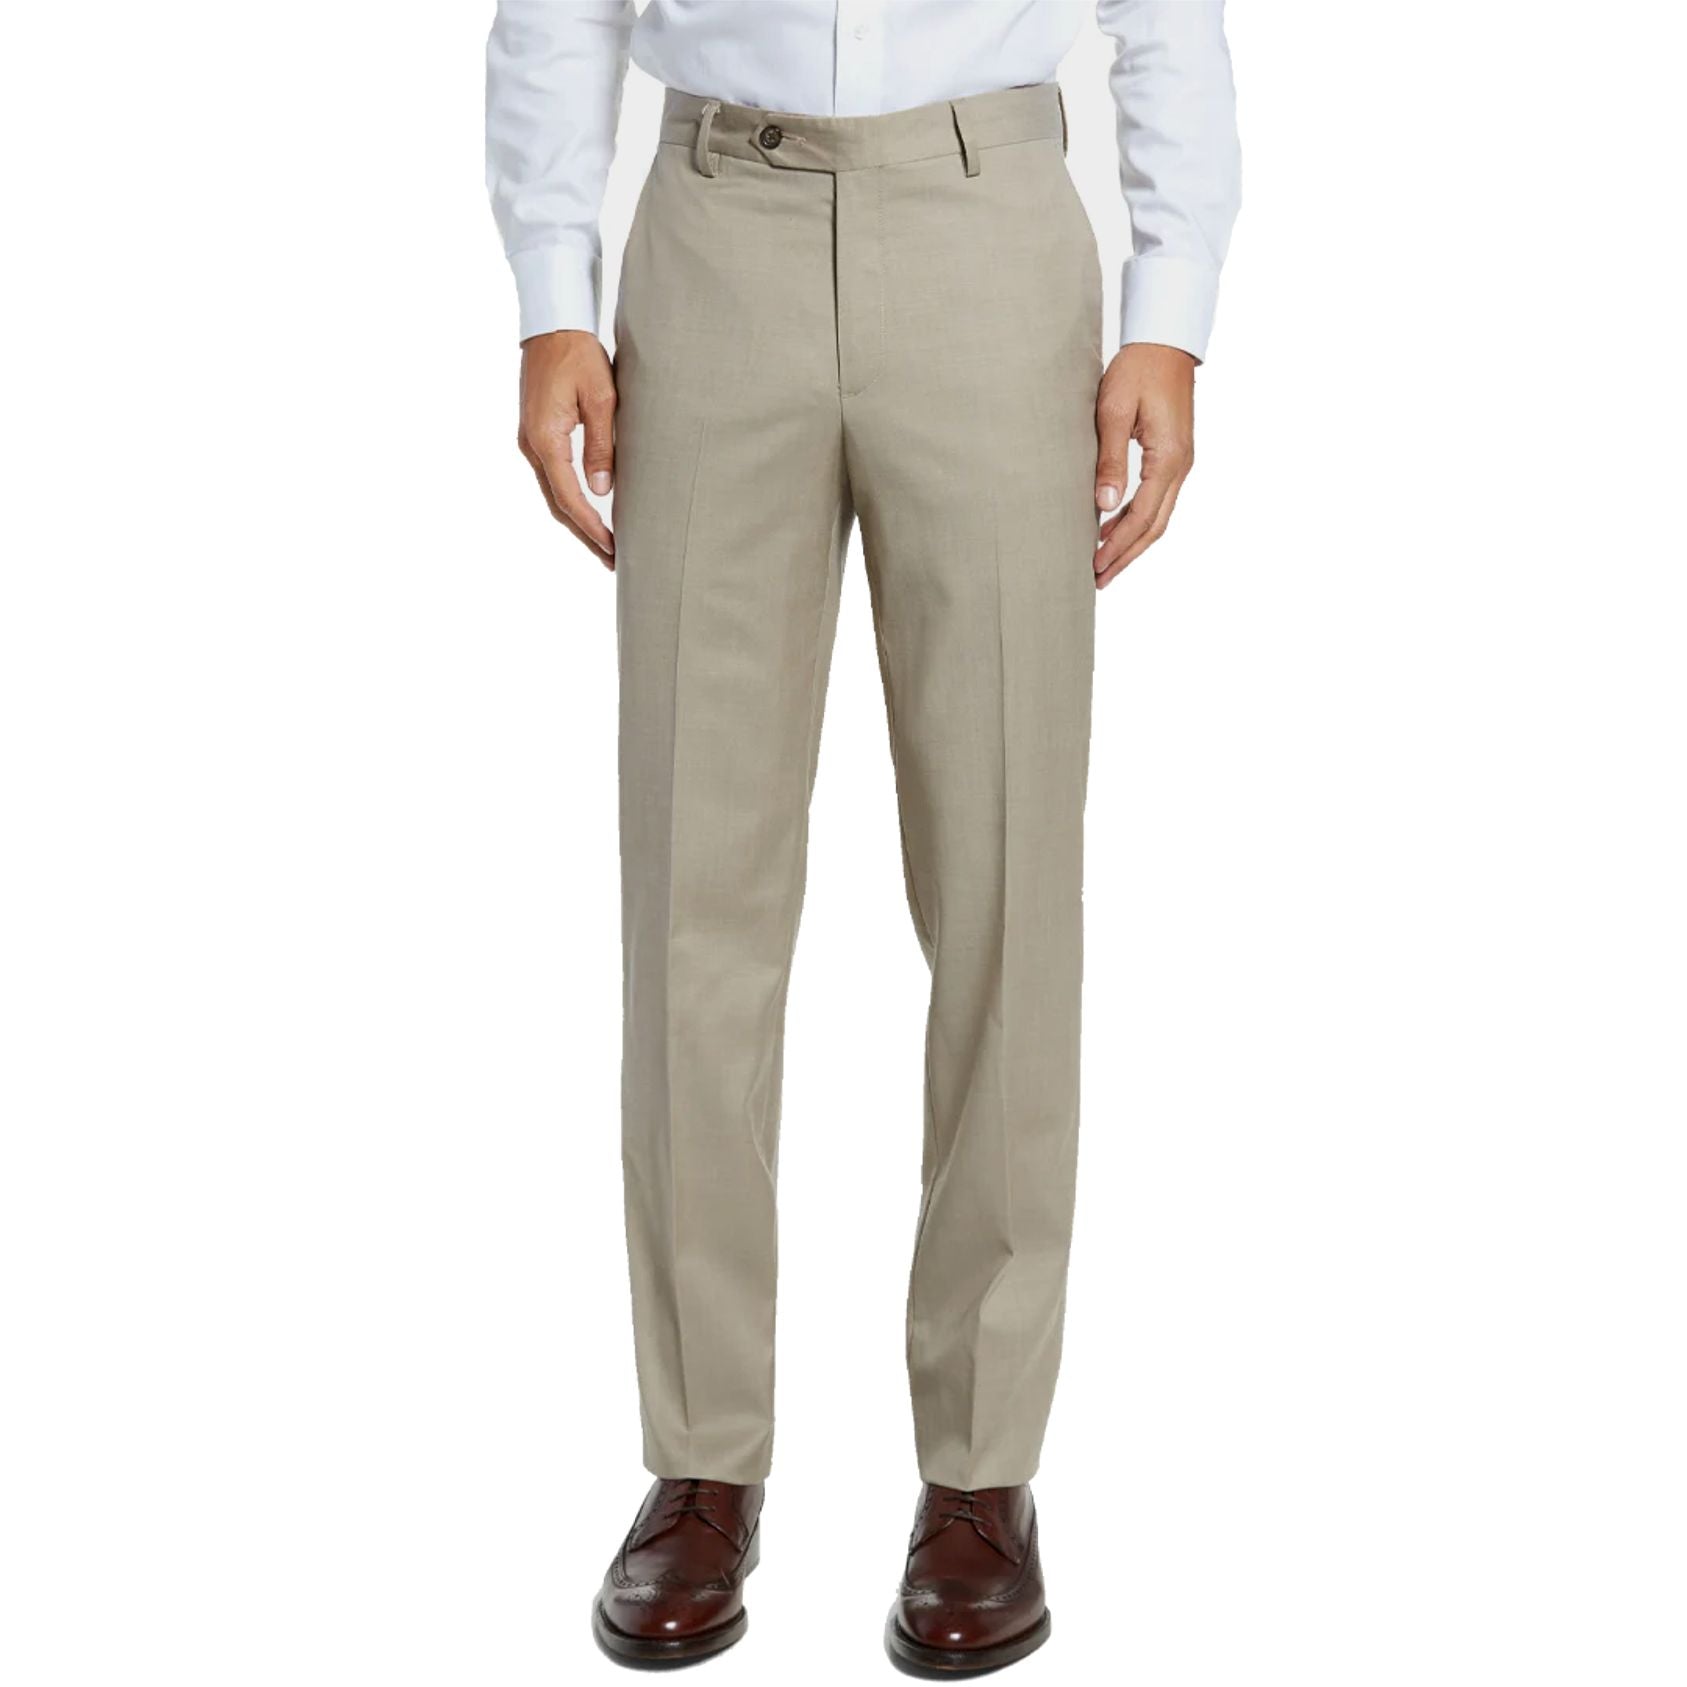 Stretch Gabardine Worsted Wool Trouser in Tan (Tribeca Modern Plain Front) by Berle